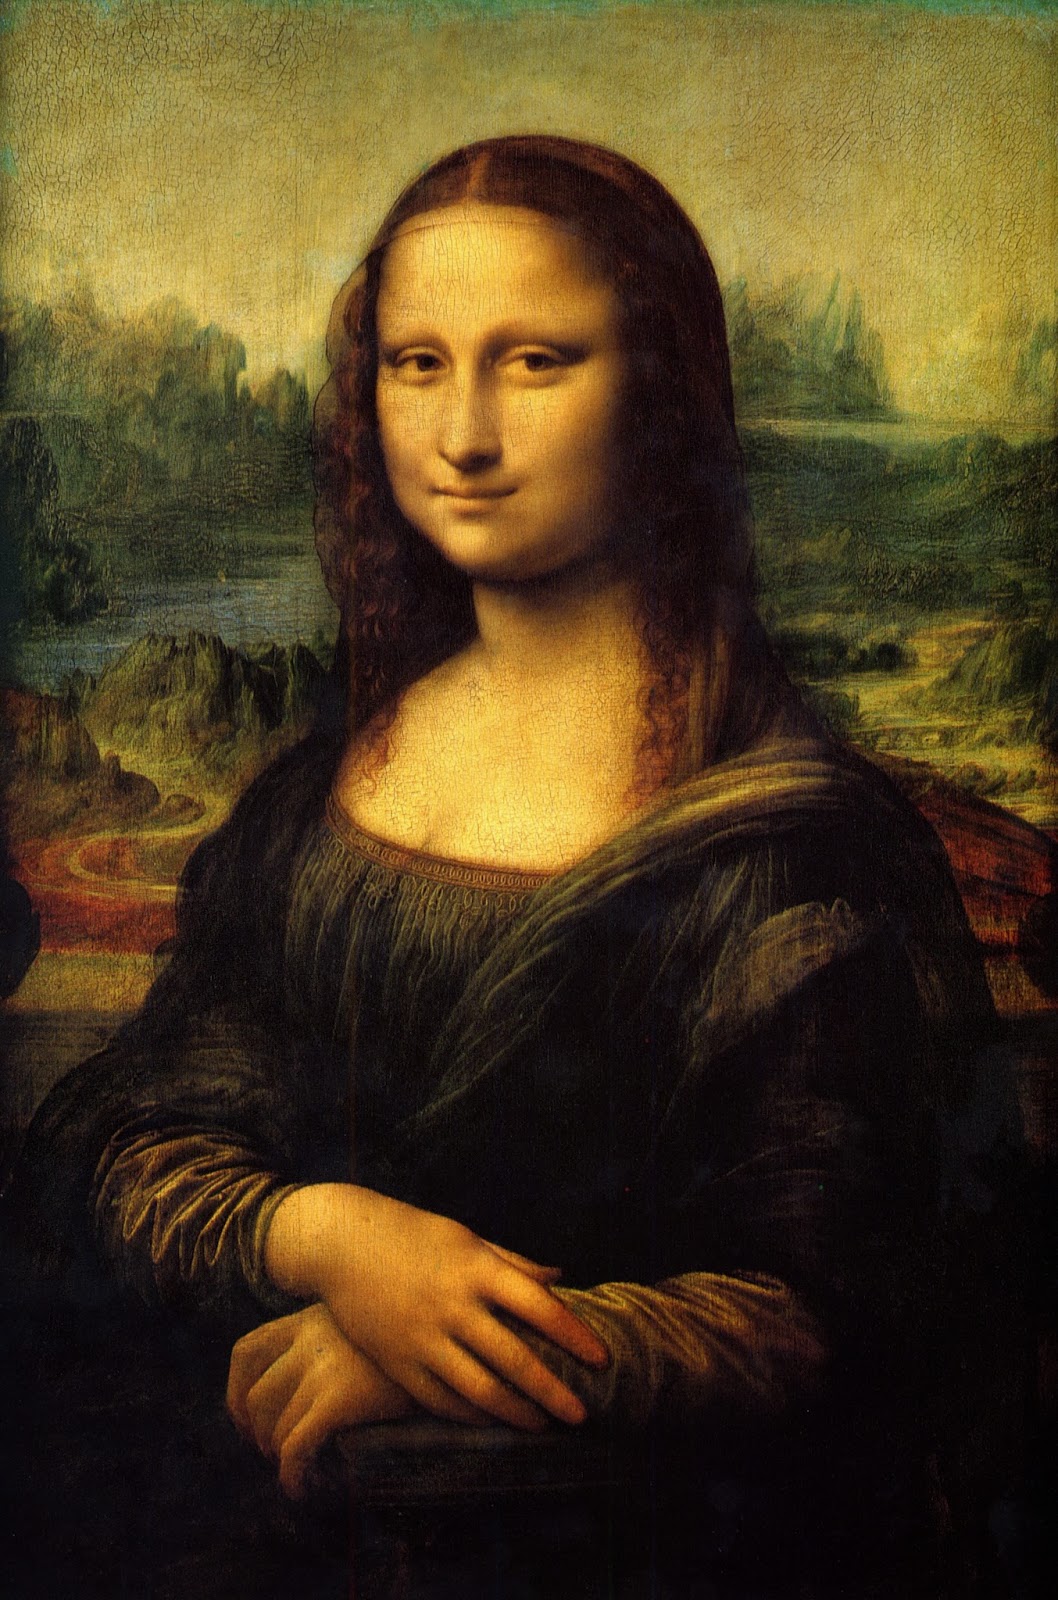 Monalisa Conservadora, Painting by Angela Gomes